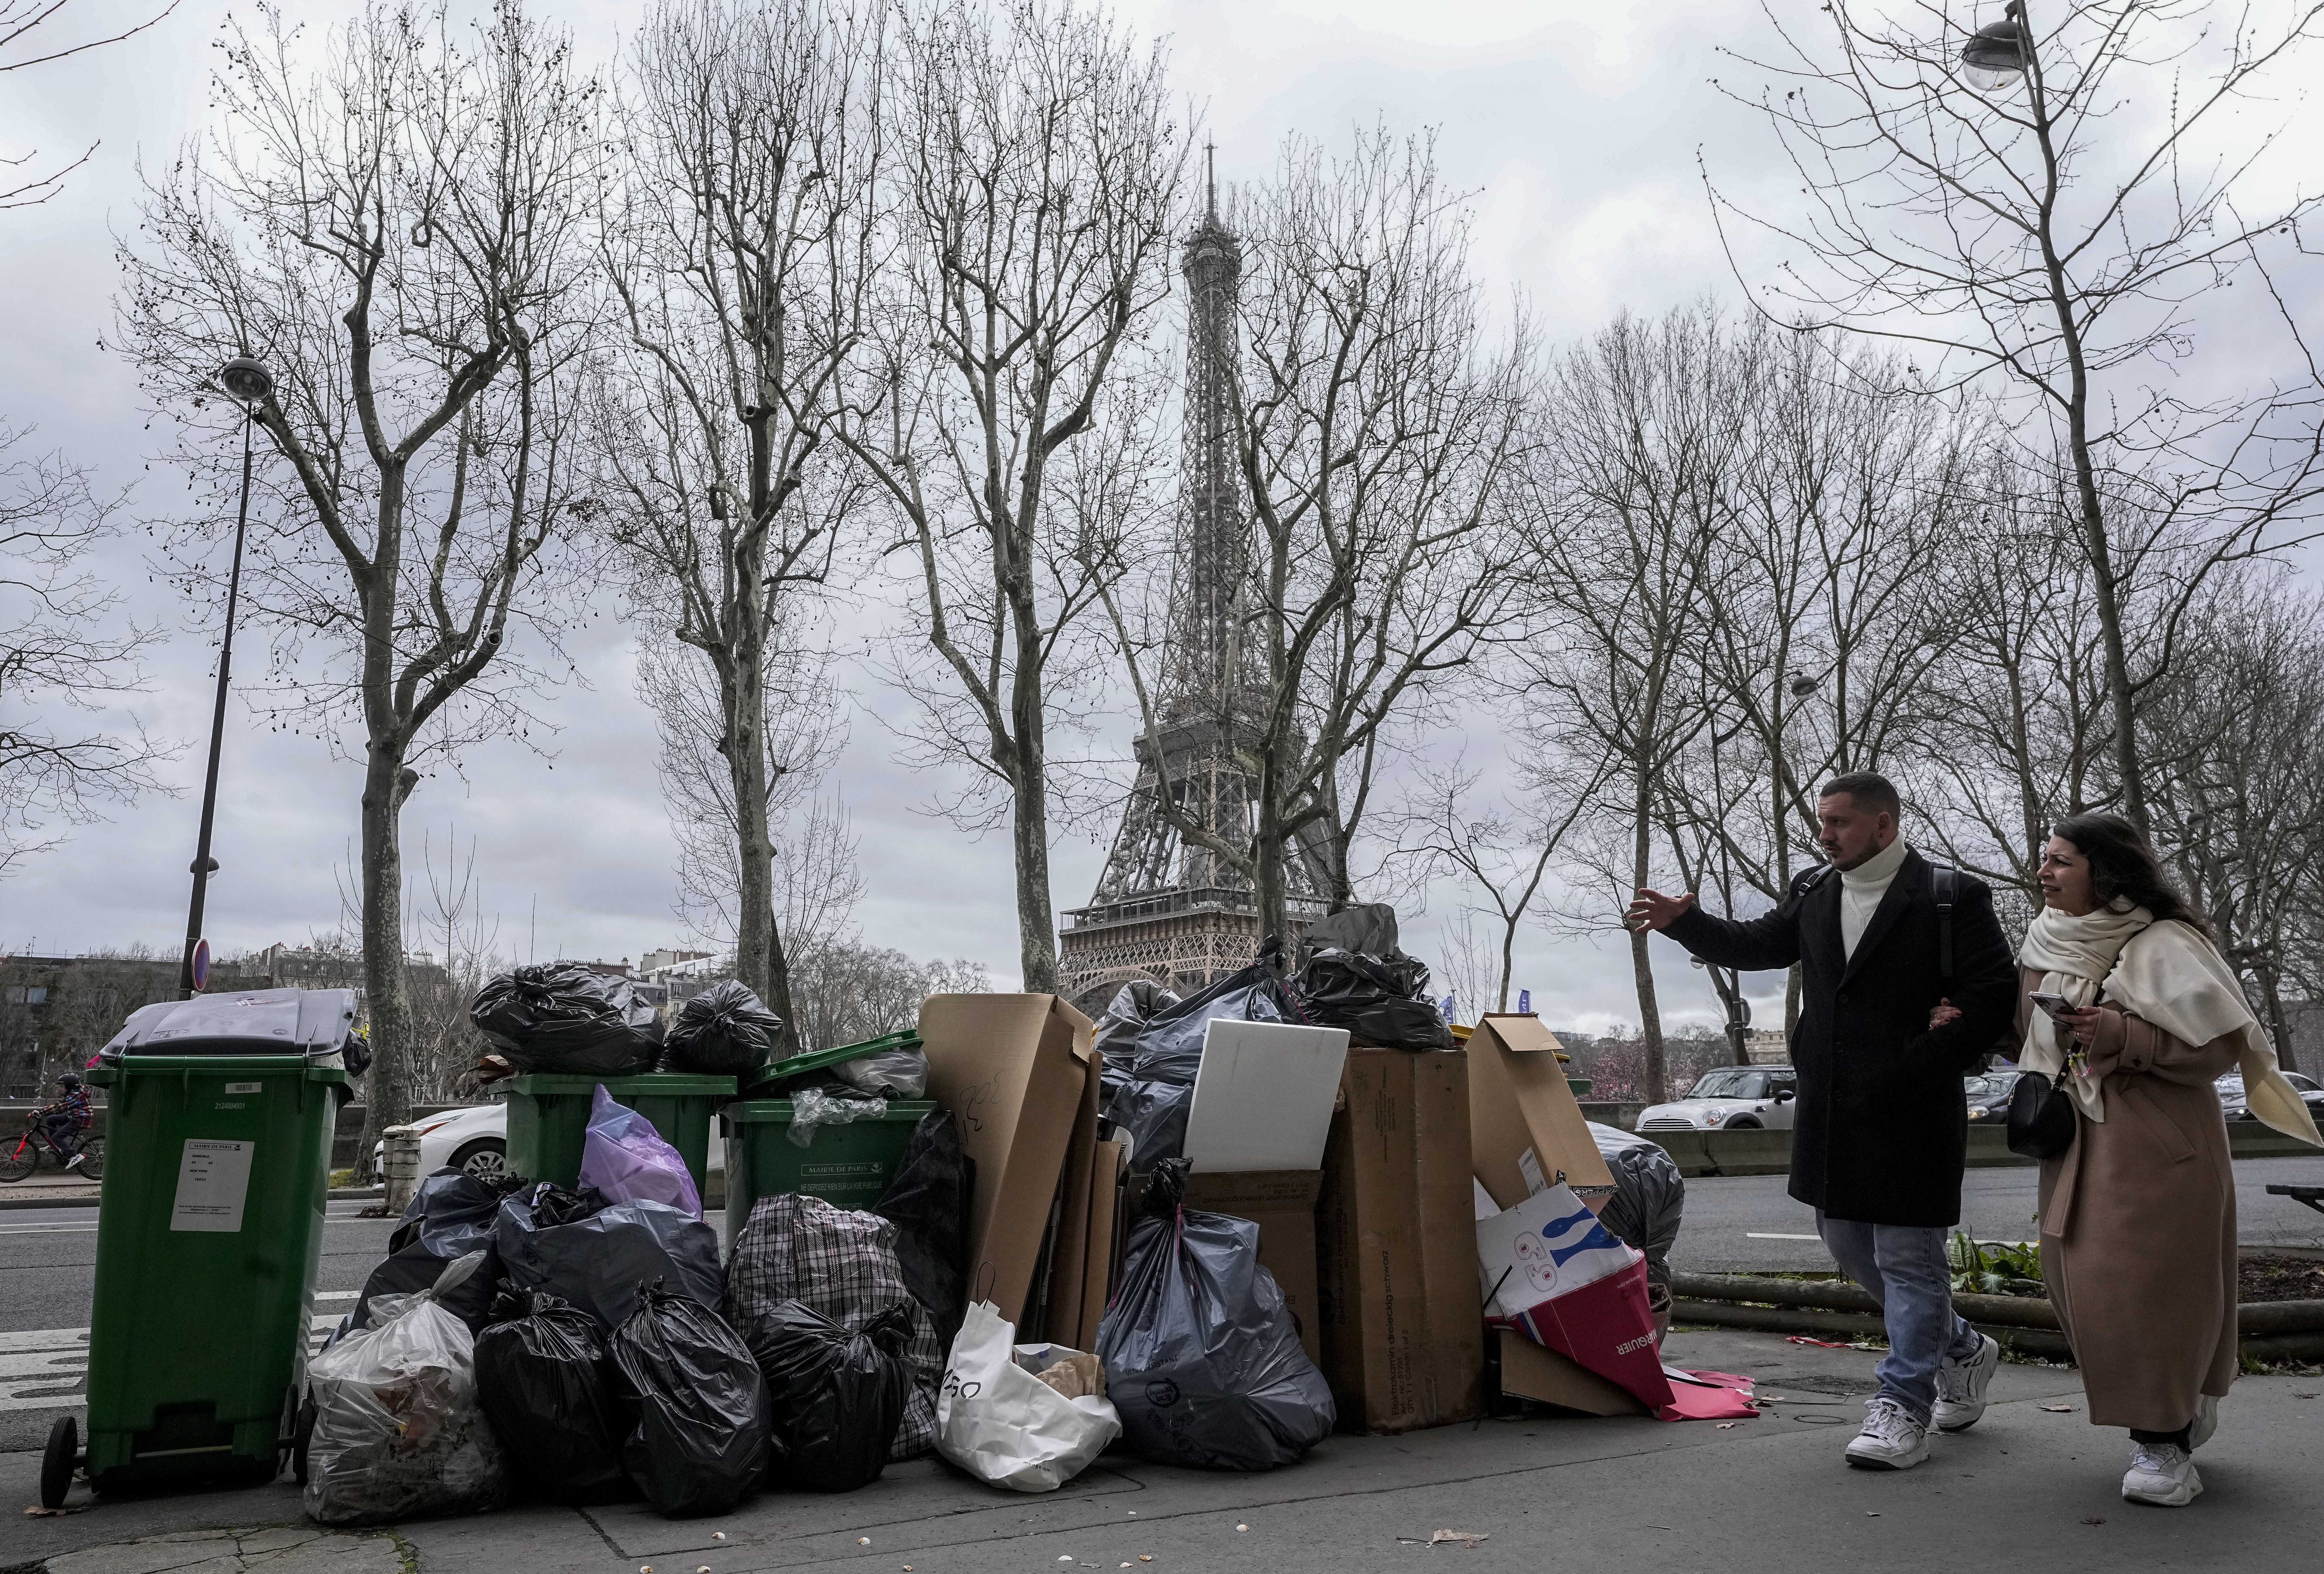 Two people walk past overflowing trash cans near the Eiffel Tower in Paris on March 12, 2023. (AP Photo/Michel Euler)